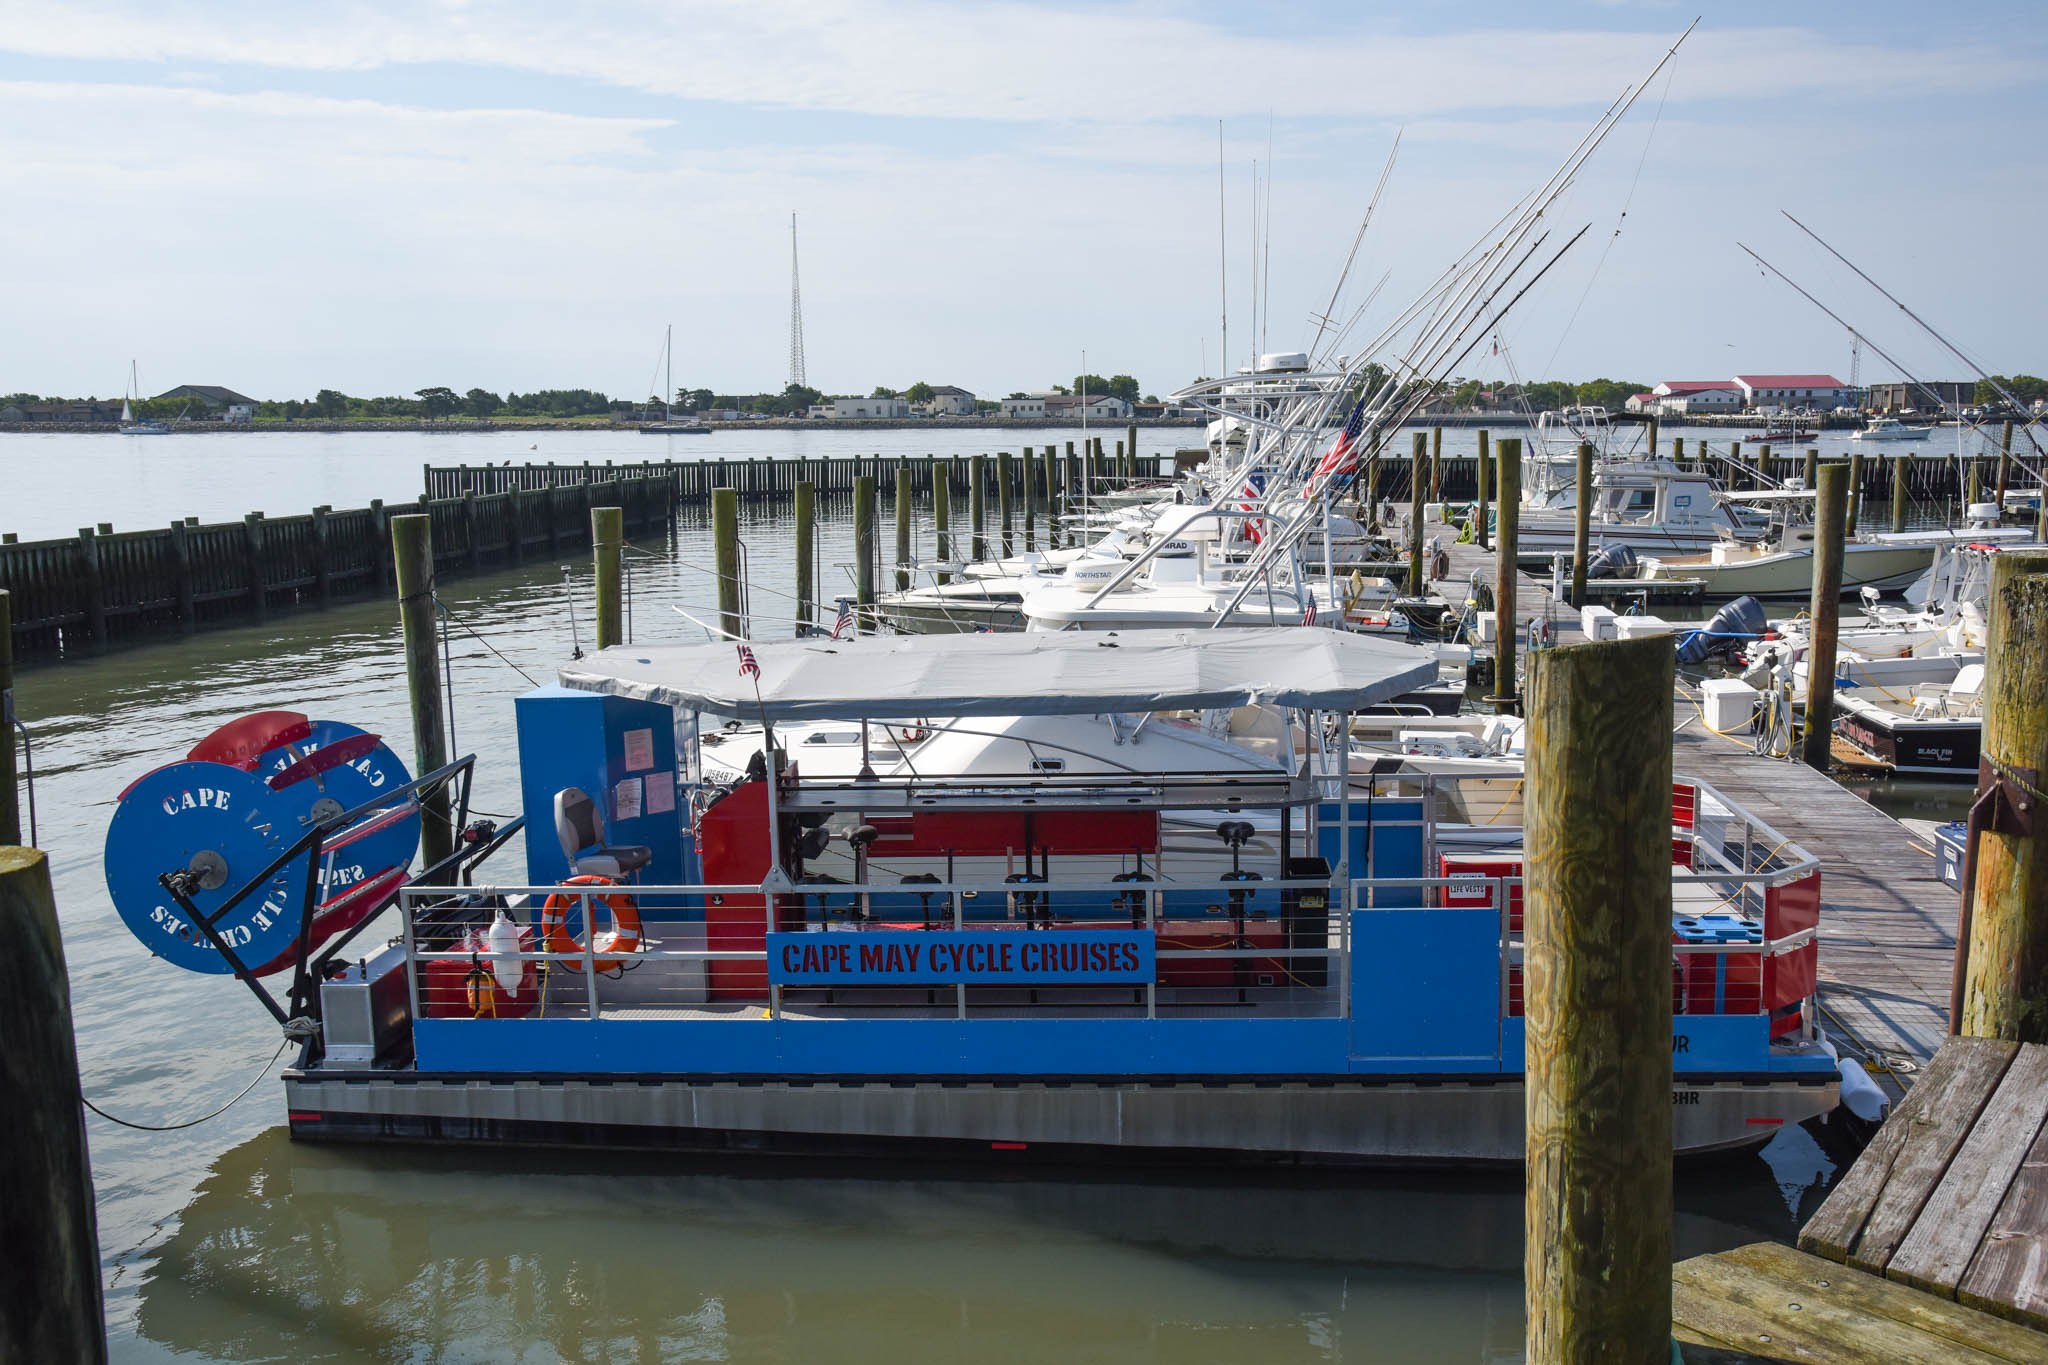 The Cape May Cycle Cruises is the first slip at the last dock next to the Harbor View. 